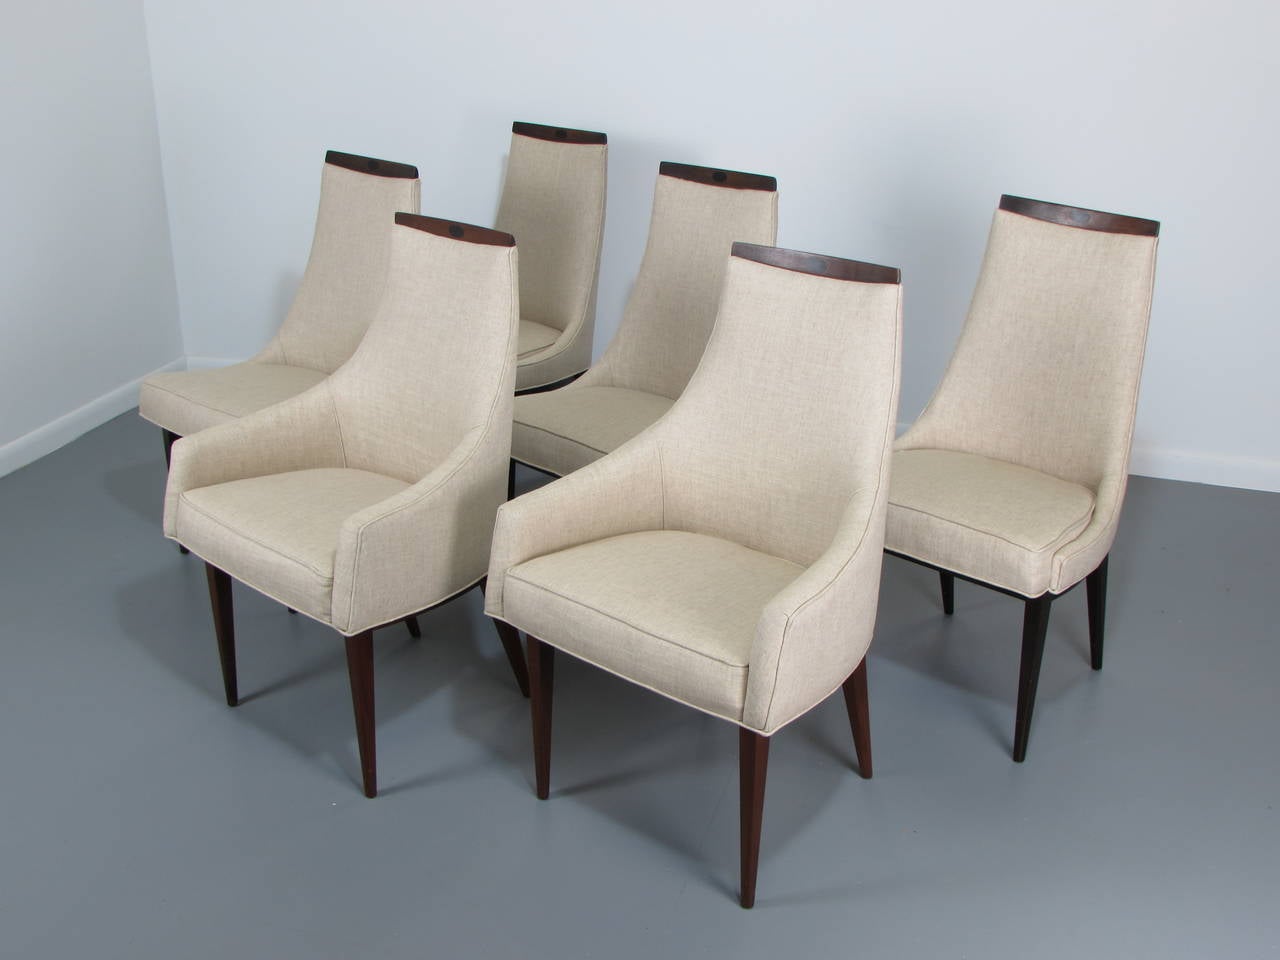 Six gorgeous and rare dining chairs by Kipp Stewart for Calvin / Directional Furniture, 1950s. Fantastically comfortable with elegant, clean lines. These chairs are very hard to find. This set includes four side chairs and two captains chairs. They